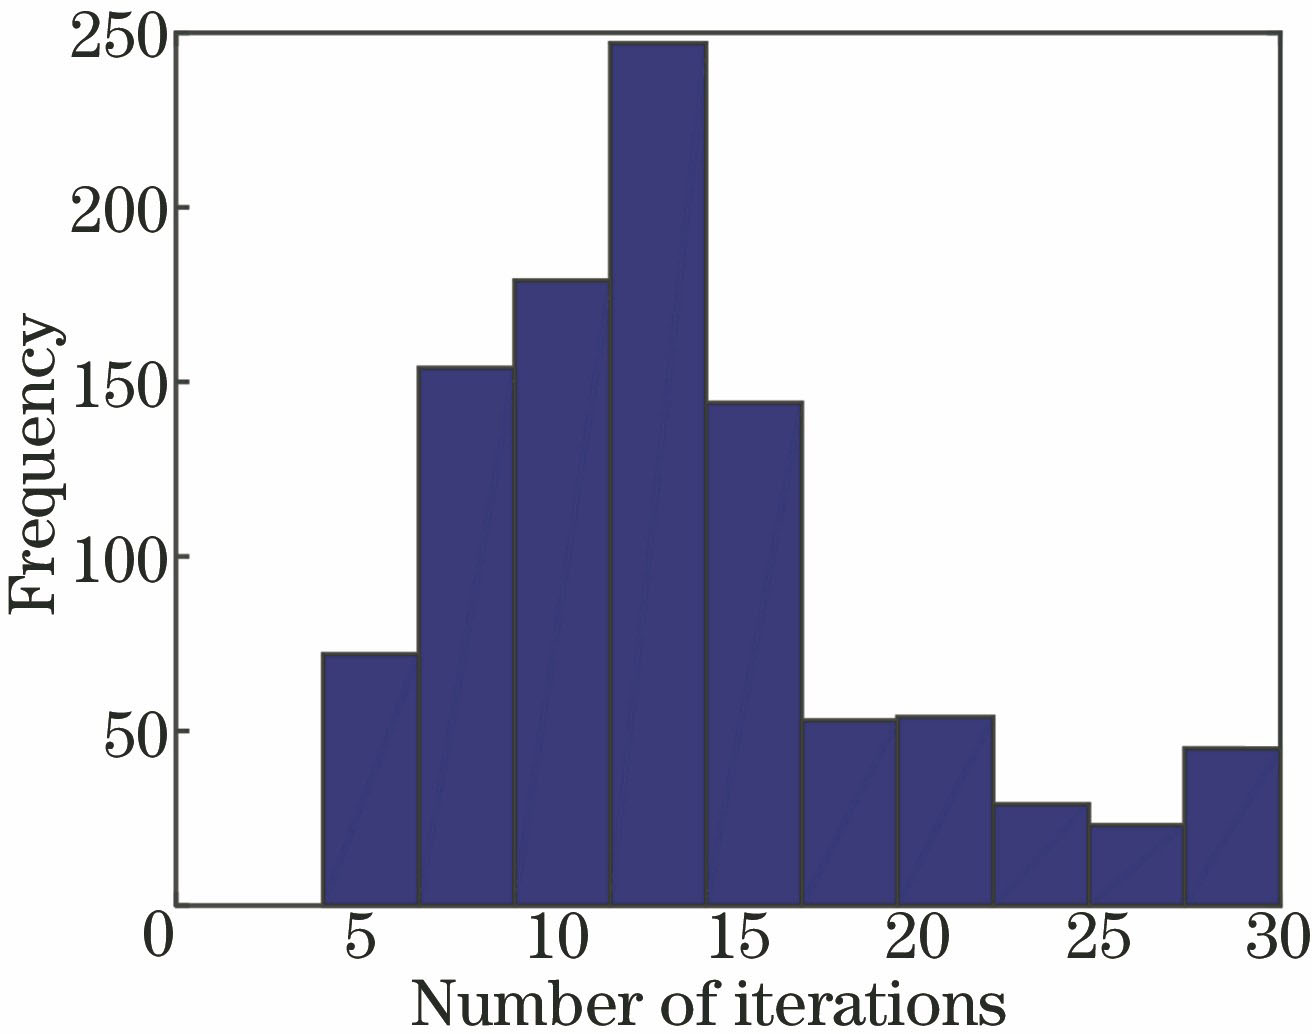 Histogram of number of iterations for weight coefficient